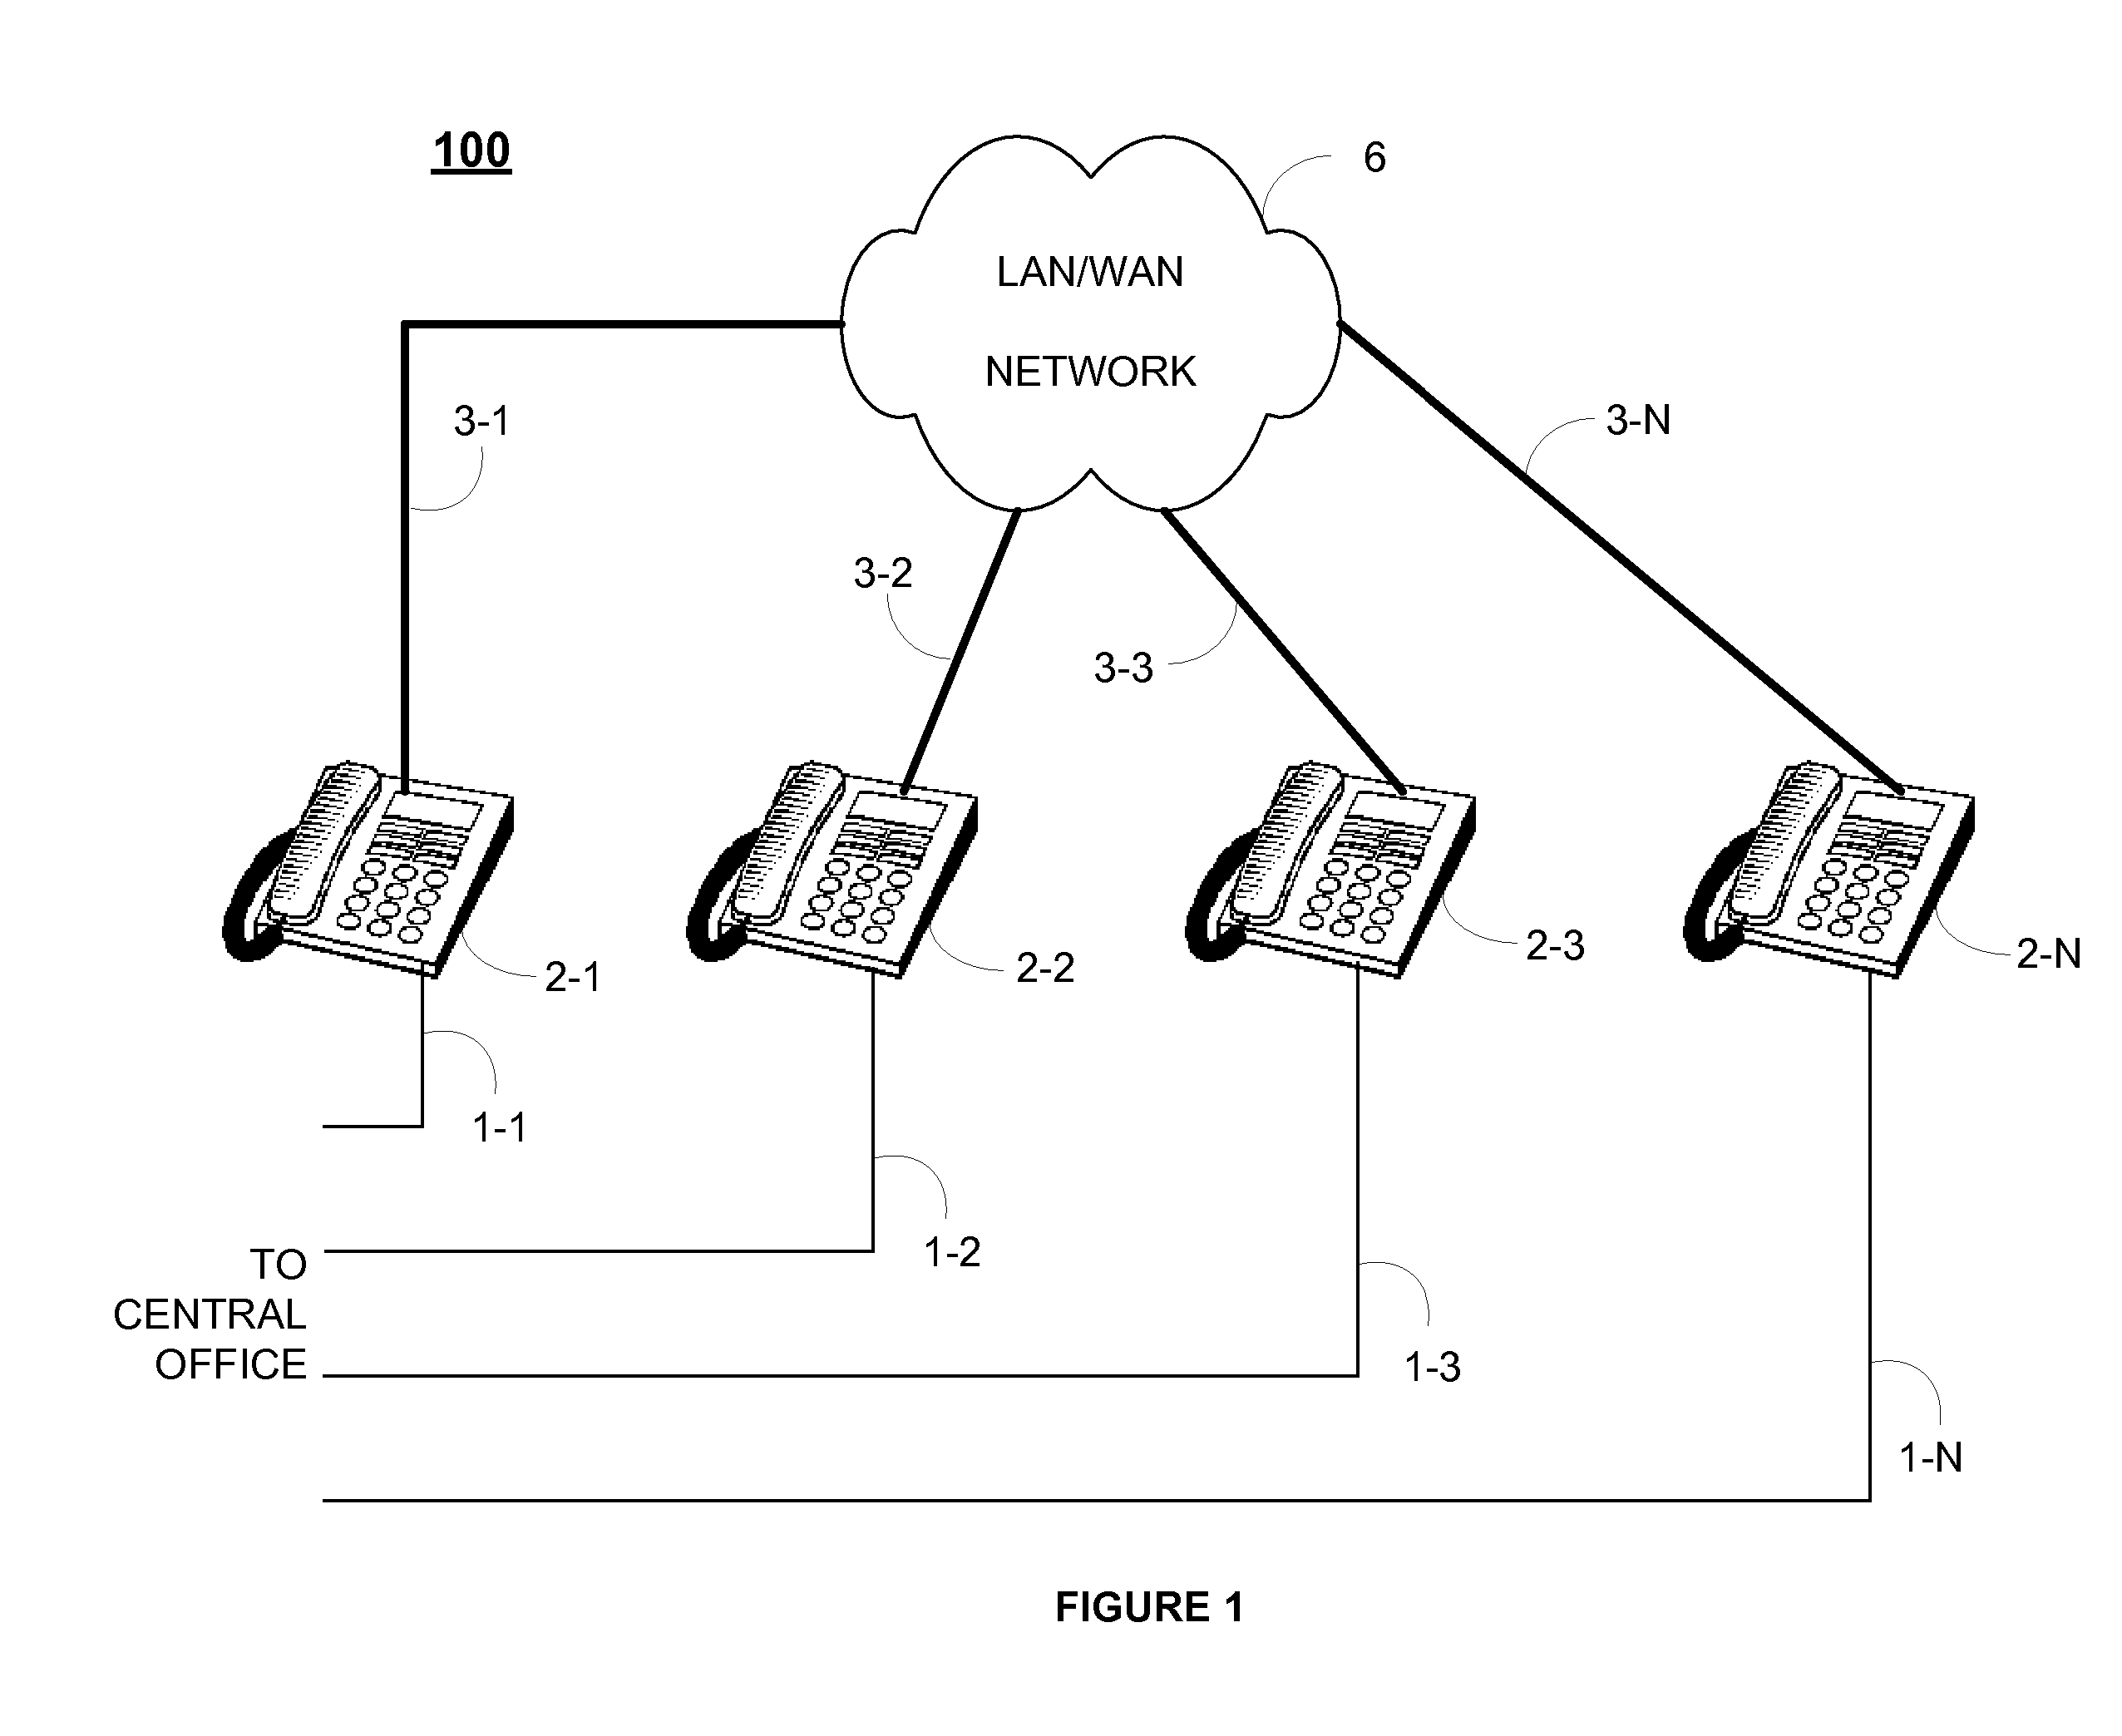 Server-less telephone system and methods of operation